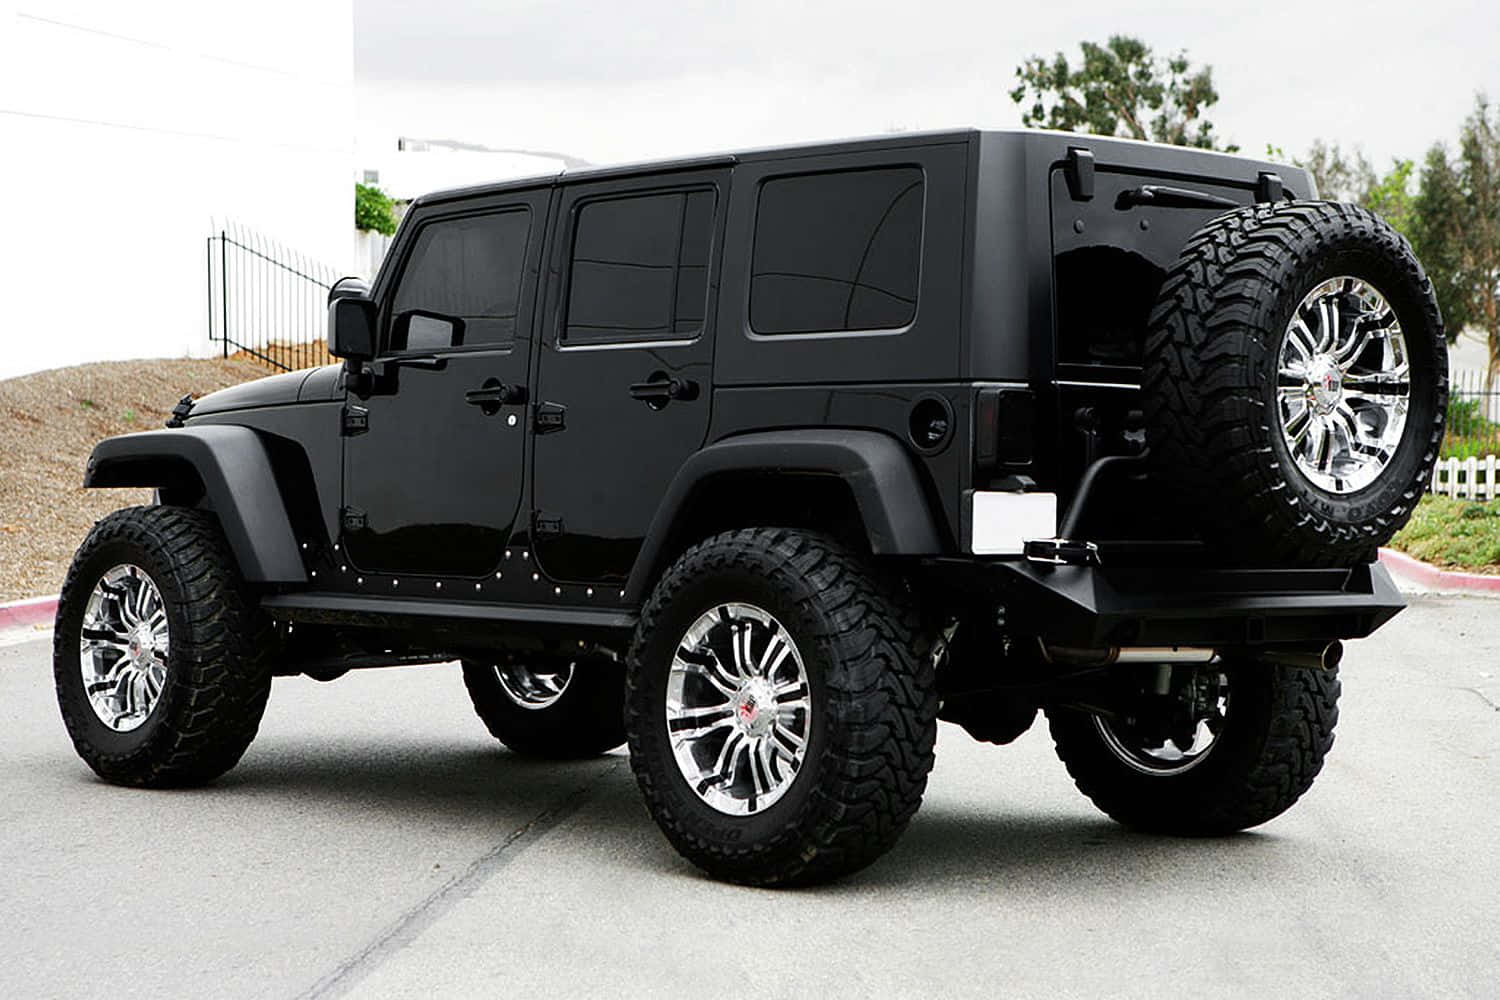 Explore the open roads with a sleek black Jeep.